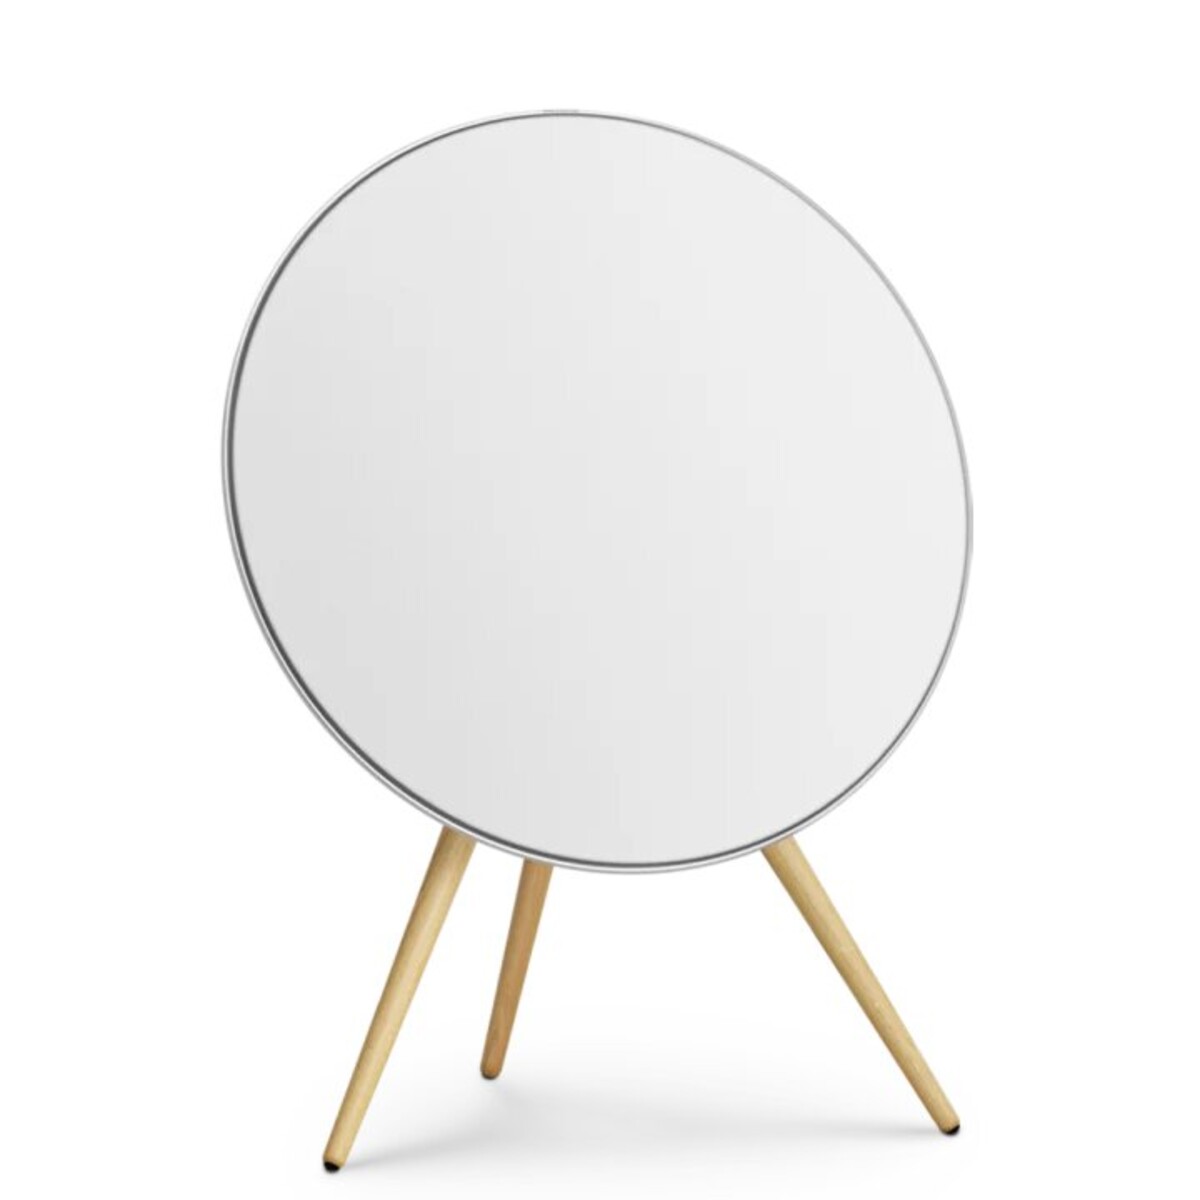 BeoPlay A9 – 4th Gen.